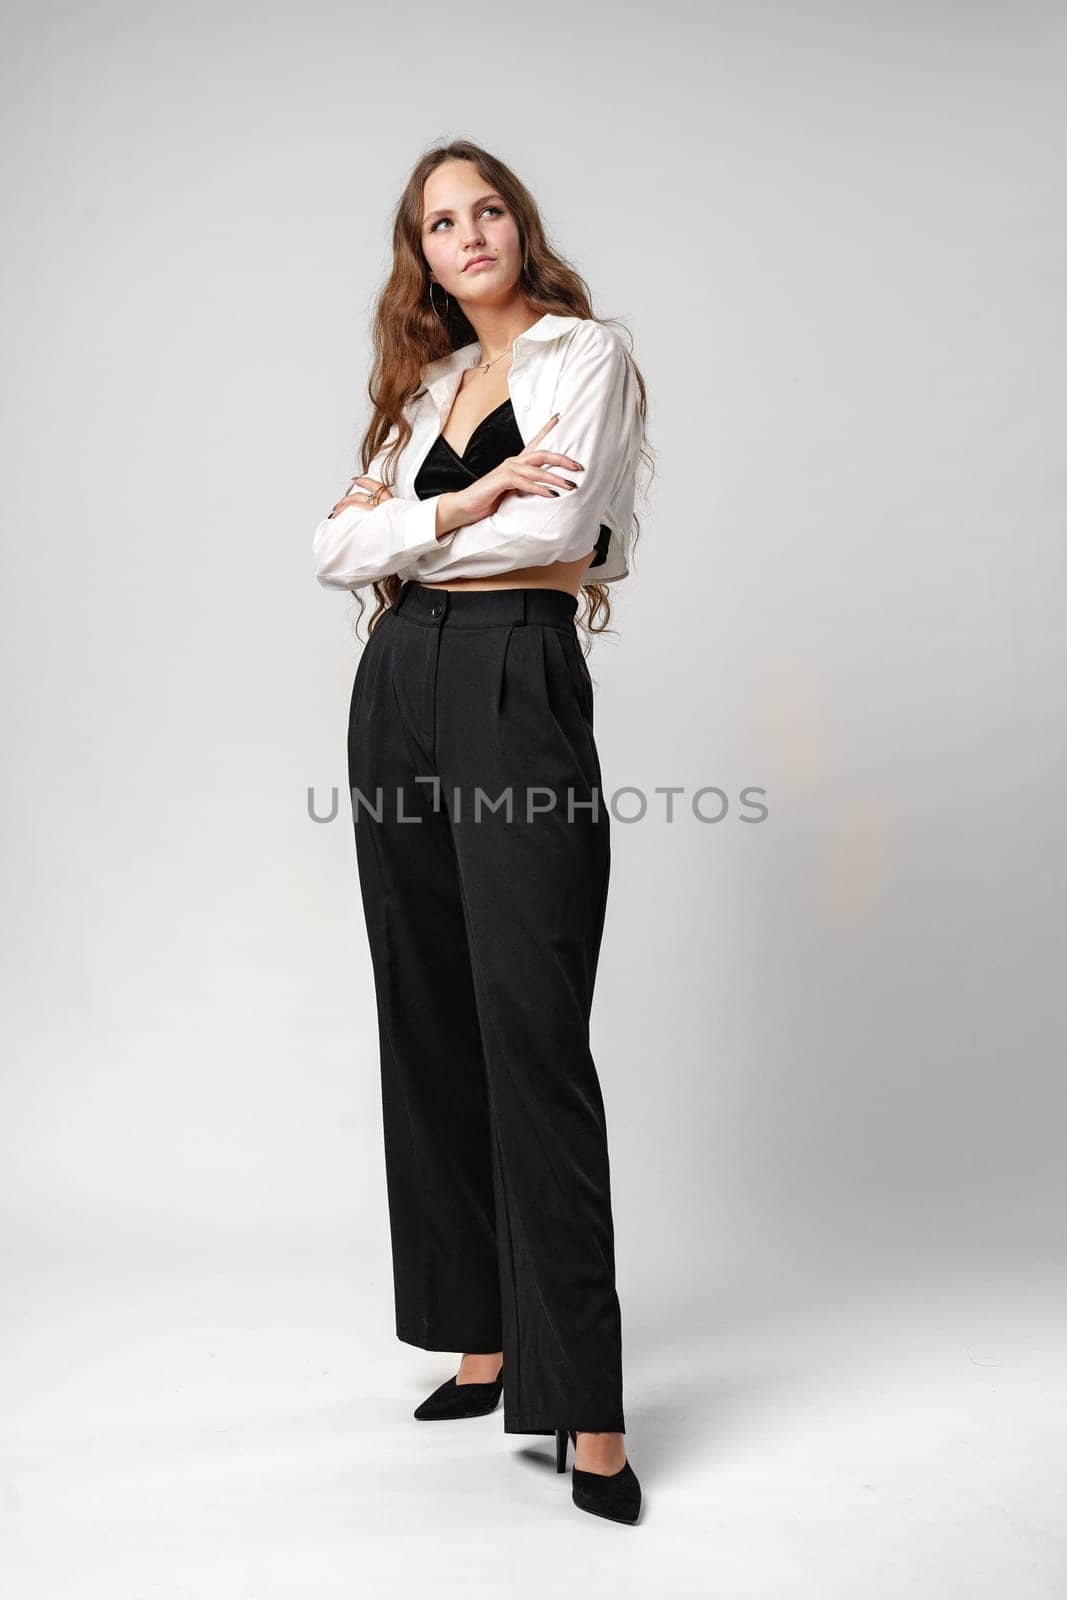 Woman in White Shirt and Black Pants by Fabrikasimf